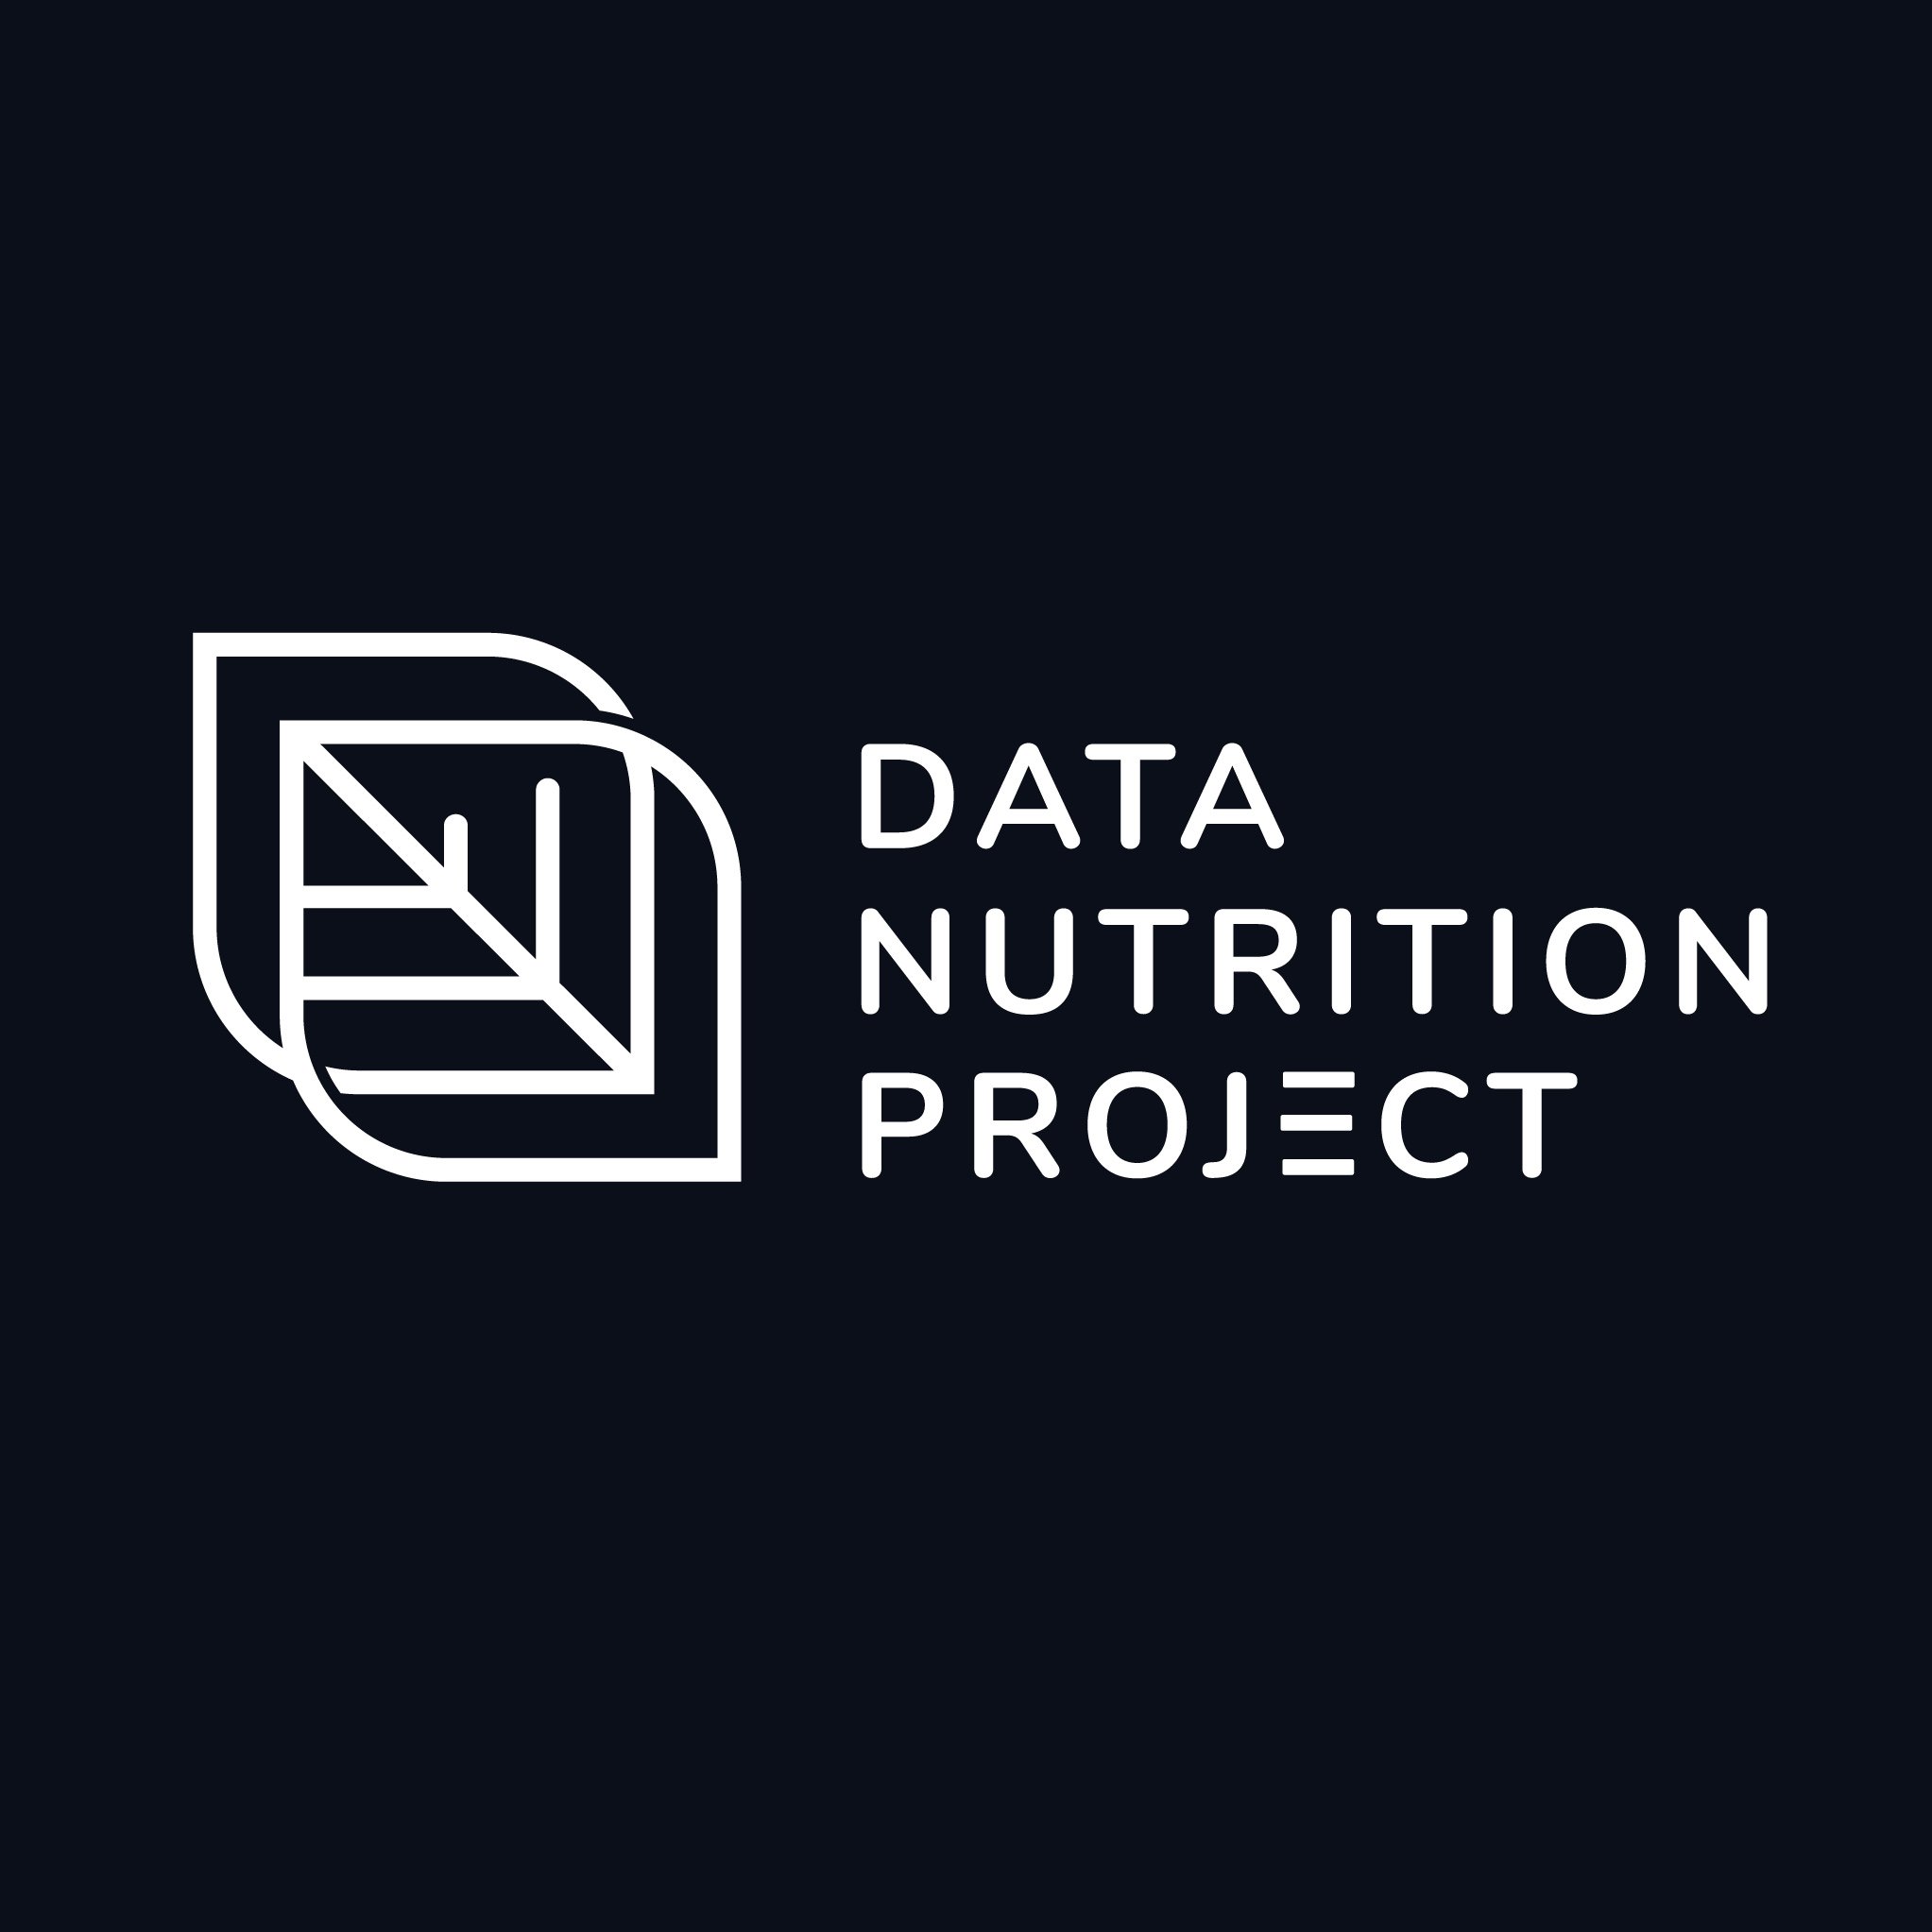 Data Nutrition Project